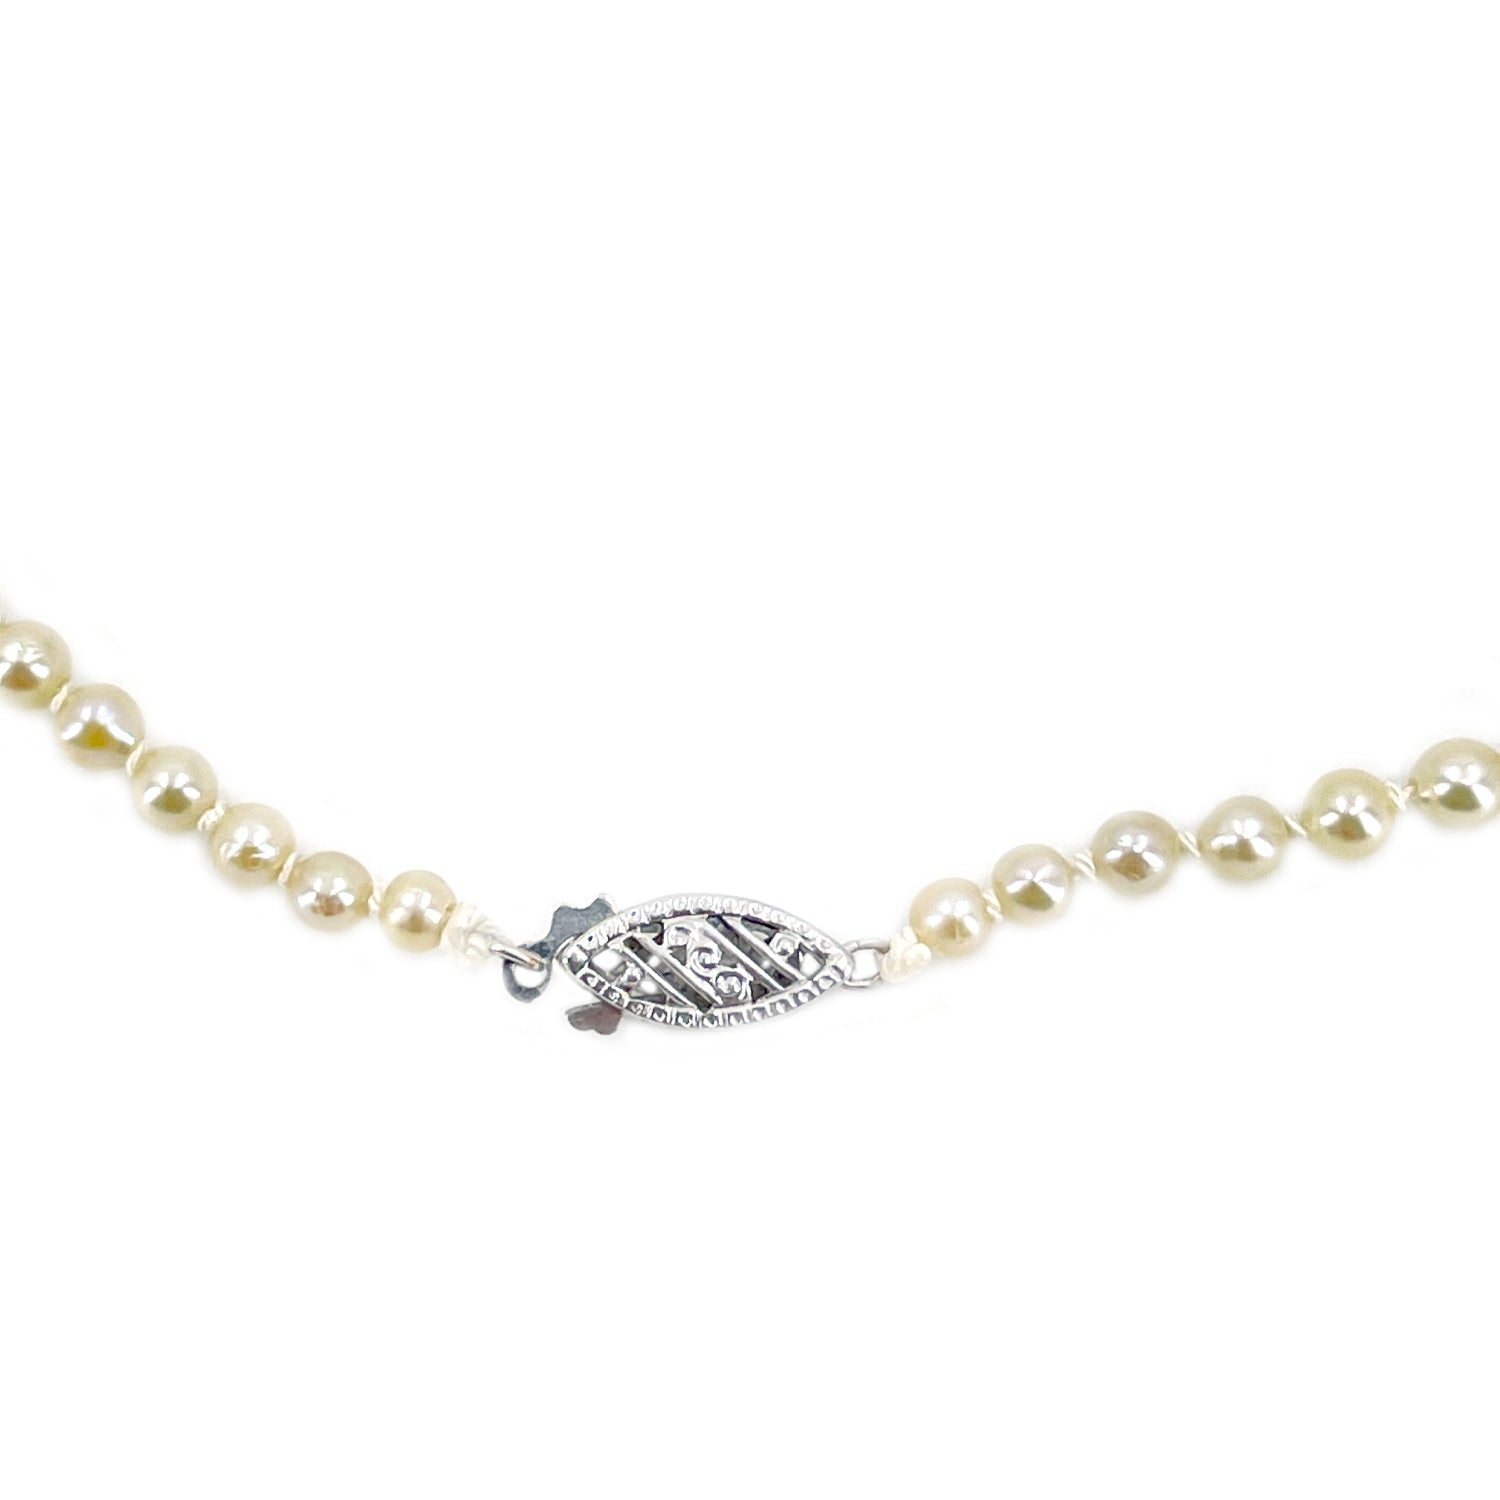 Golden Cream Japanese Saltwater Cultured Akoya Pearl Graduated Vintage Necklace - 10K White Gold 20 Inch